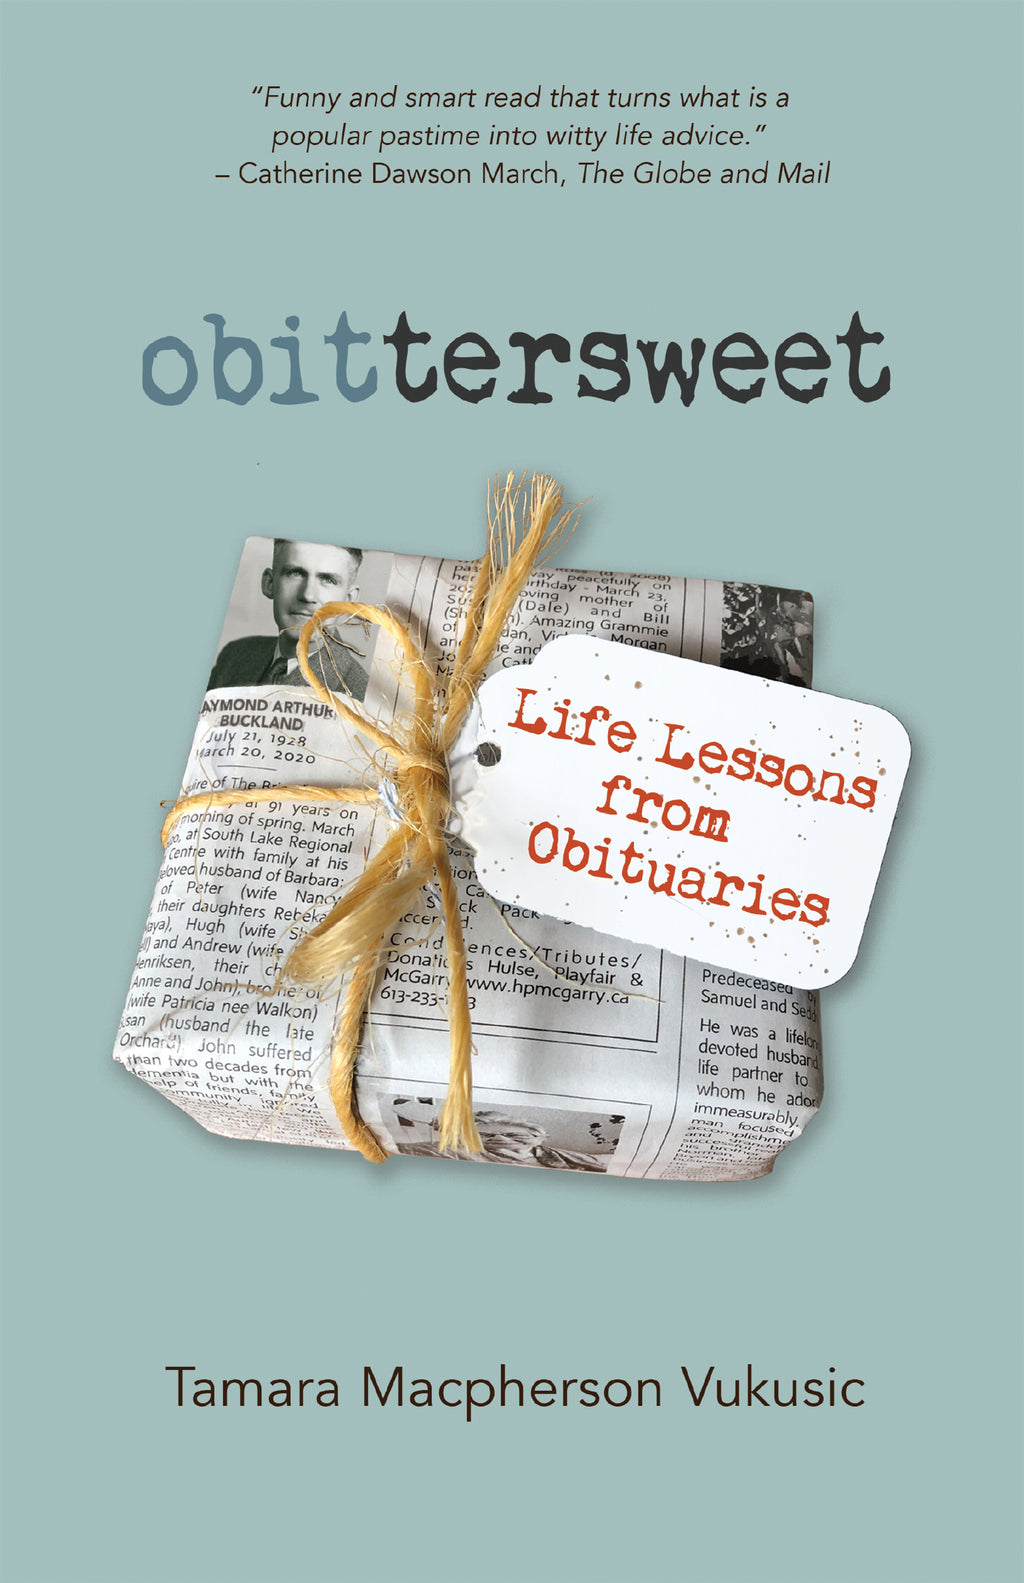 obittersweet: Life Lessons from Obituaries